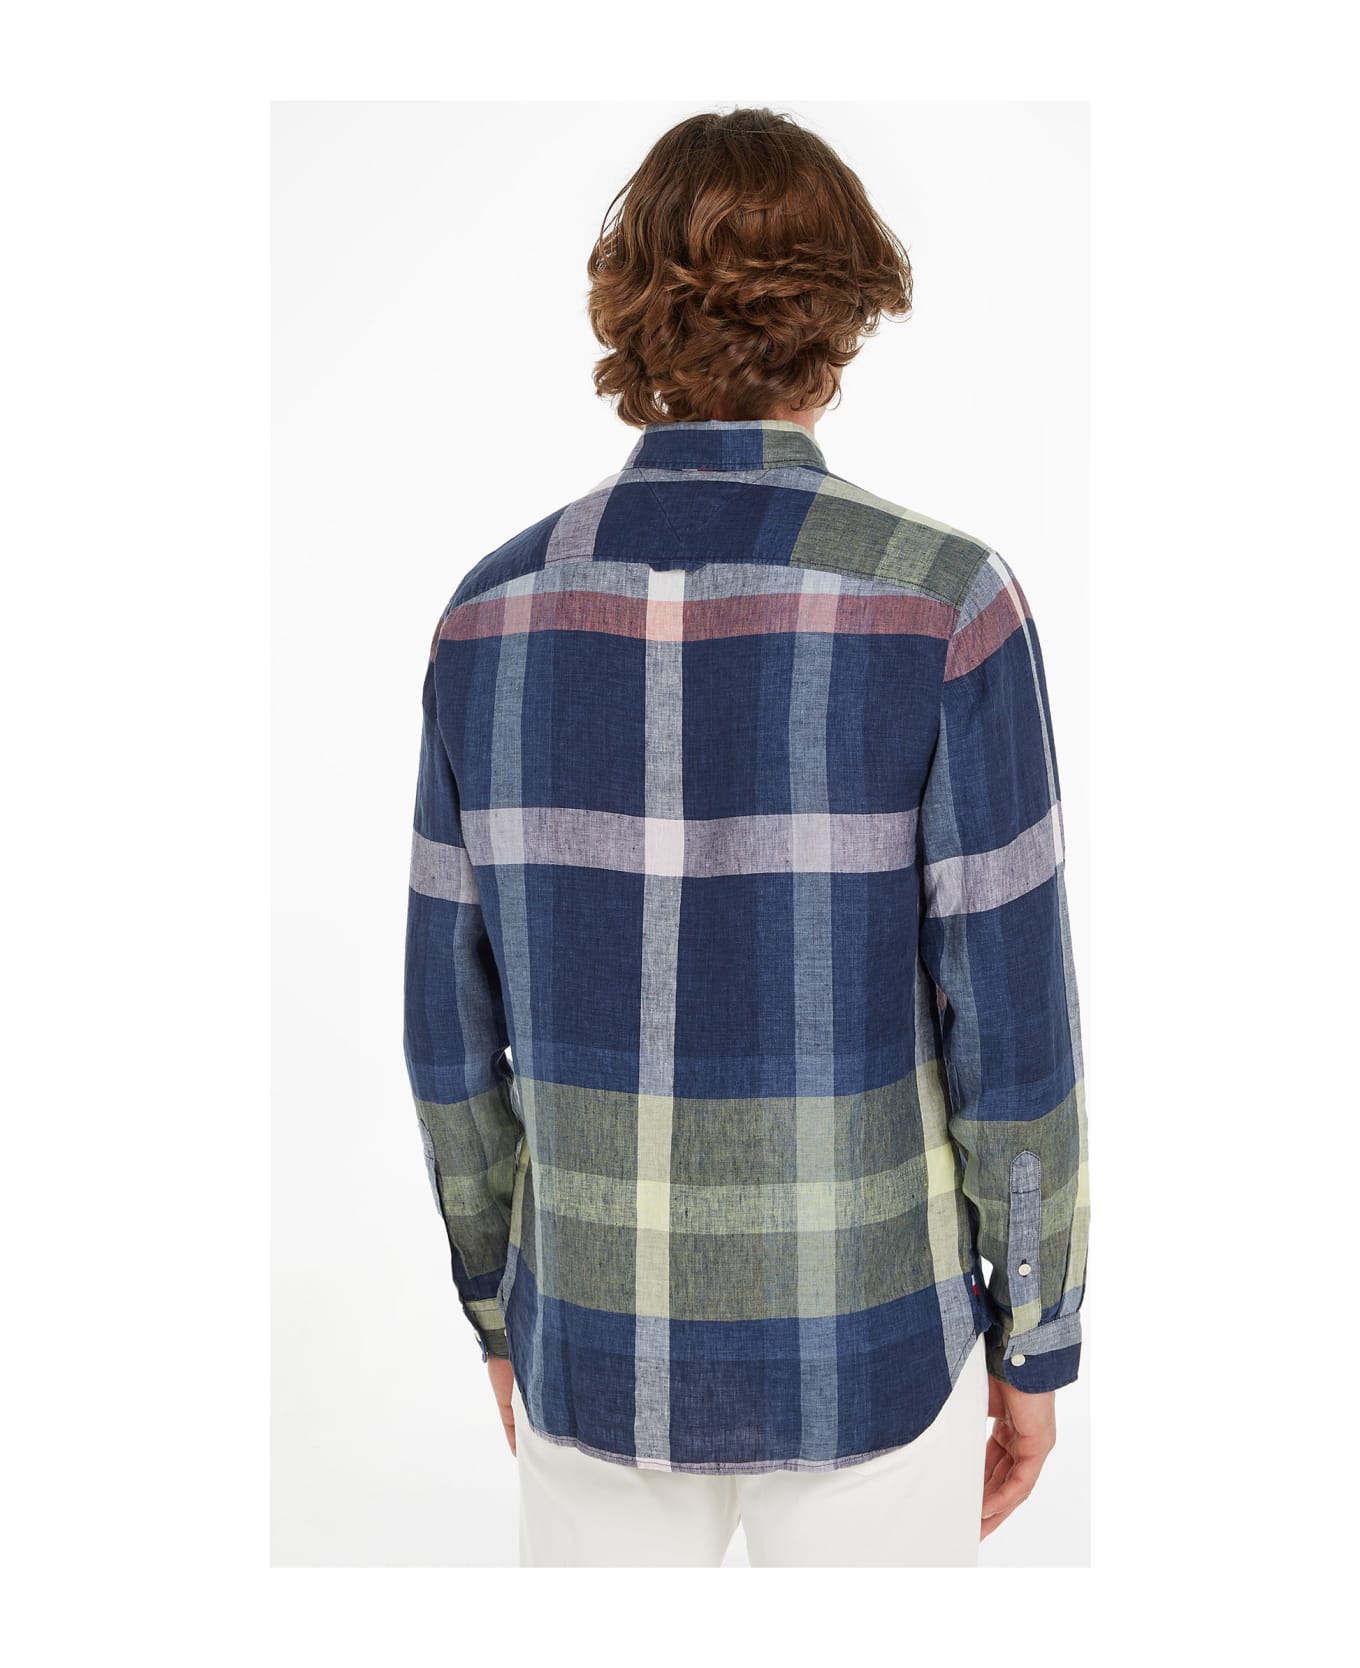 Tommy Hilfiger Multicolored Checked Shirt - CARBON NAVY/MULTI